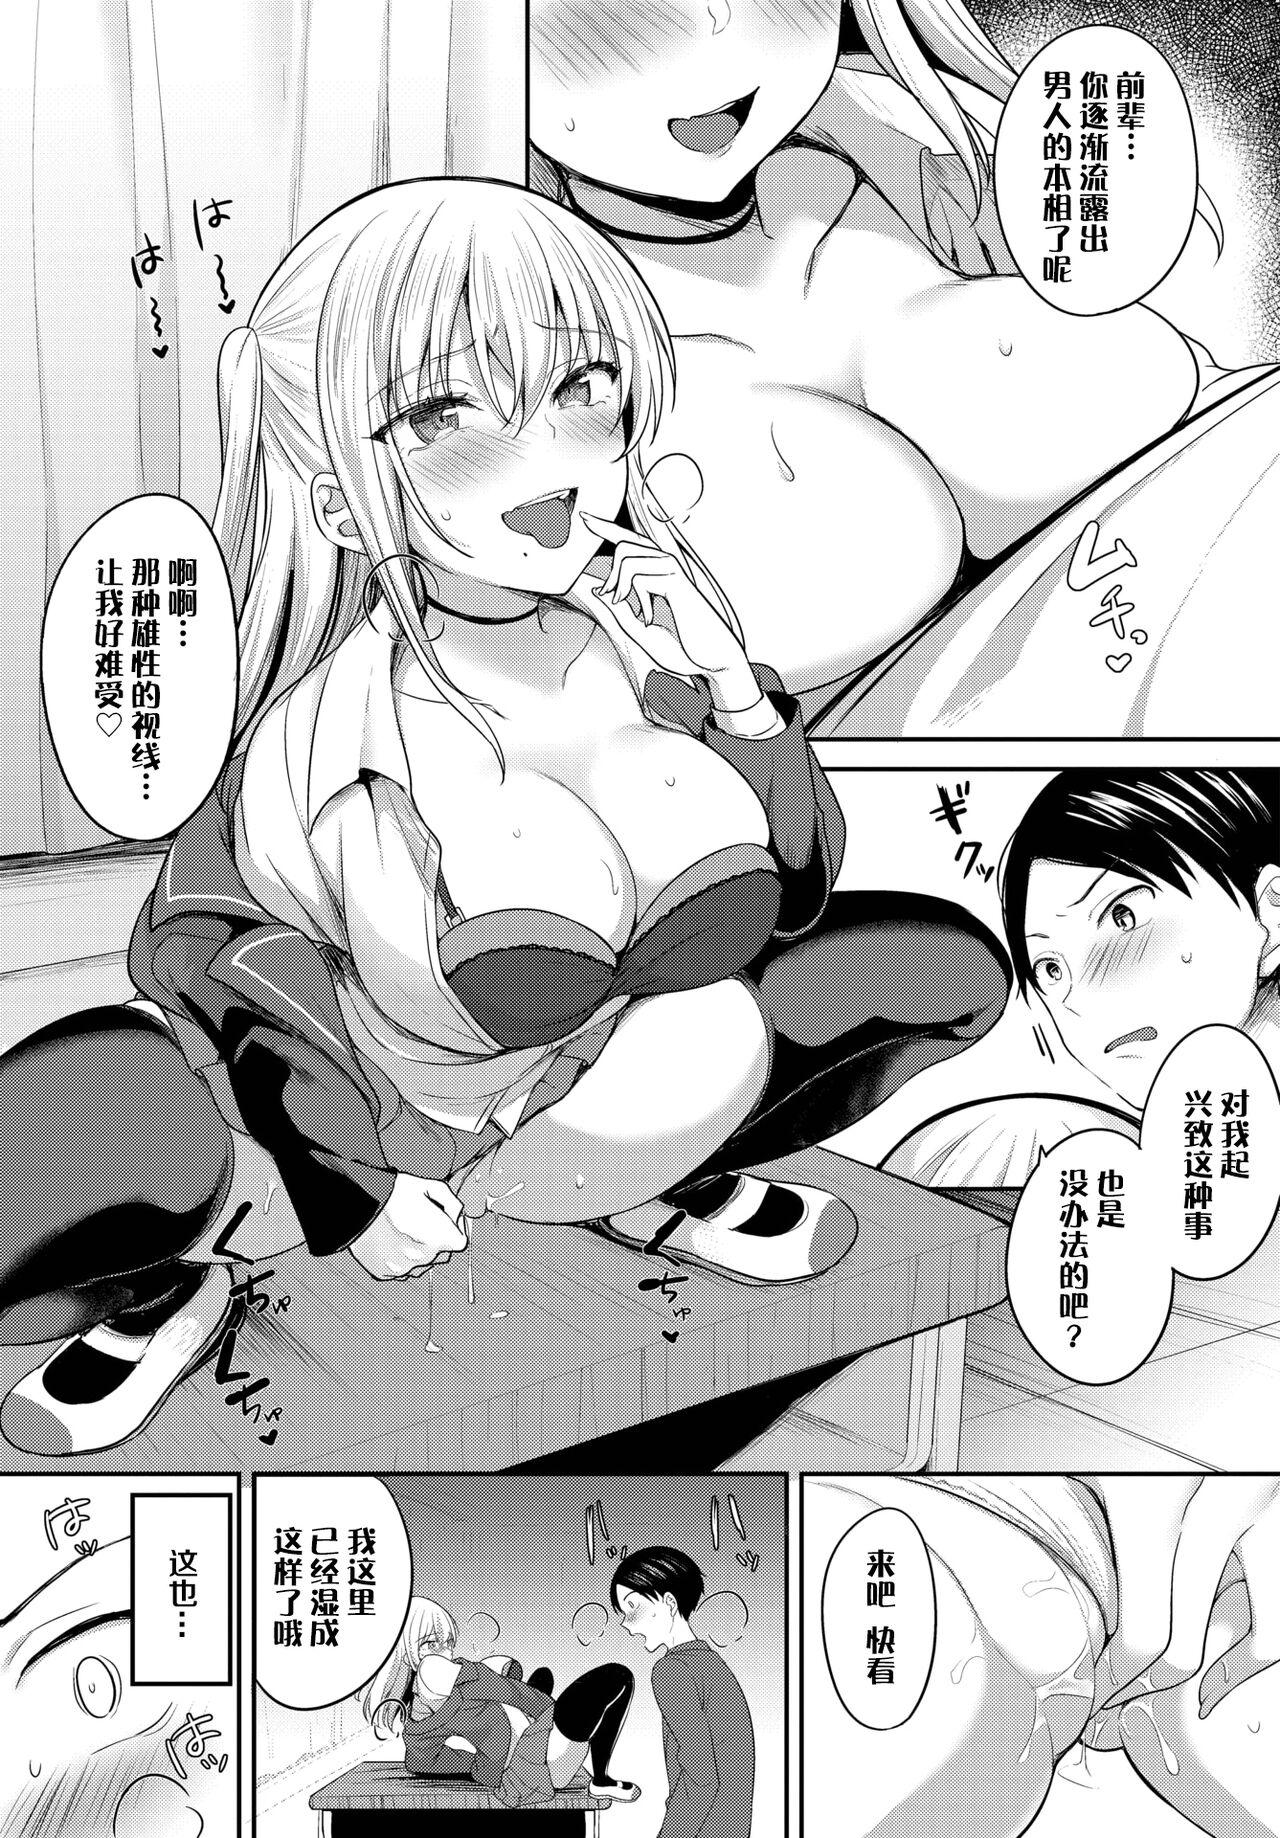 Lingerie Senior, would you like to have sex? Love - Page 7